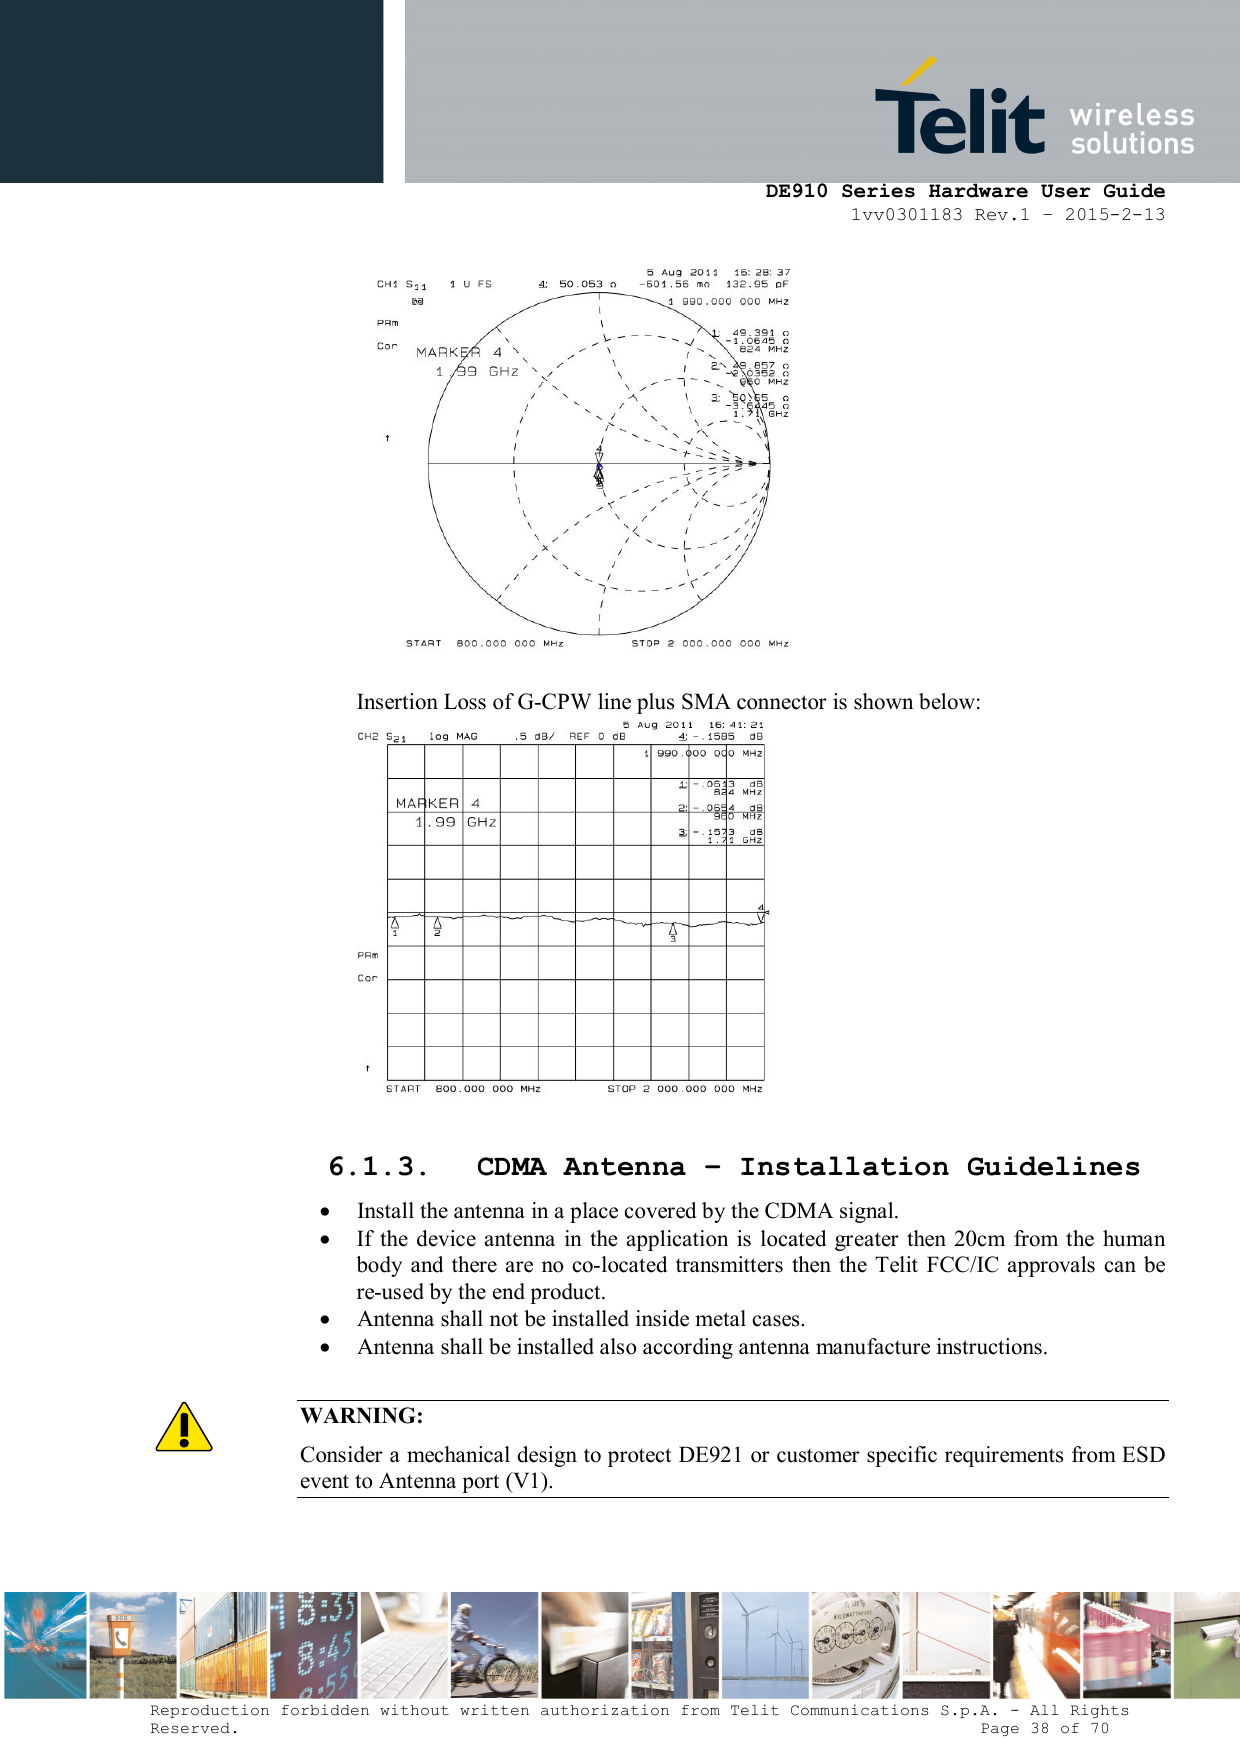      DE910 Series Hardware User Guide 1vv0301183 Rev.1 – 2015-2-13 Reproduction forbidden without written authorization from Telit Communications S.p.A. - All Rights Reserved.                                                                          Page 38 of 70   Insertion Loss of G-CPW line plus SMA connector is shown below:   6.1.3. CDMA Antenna – Installation Guidelines   Install the antenna in a place covered by the CDMA signal.   If the  device  antenna  in the application is  located greater  then  20cm  from  the  human body and  there are  no  co-located transmitters  then  the Telit FCC/IC approvals  can be re-used by the end product.  Antenna shall not be installed inside metal cases.  Antenna shall be installed also according antenna manufacture instructions.  WARNING: Consider a mechanical design to protect DE921 or customer specific requirements from ESD event to Antenna port (V1).  